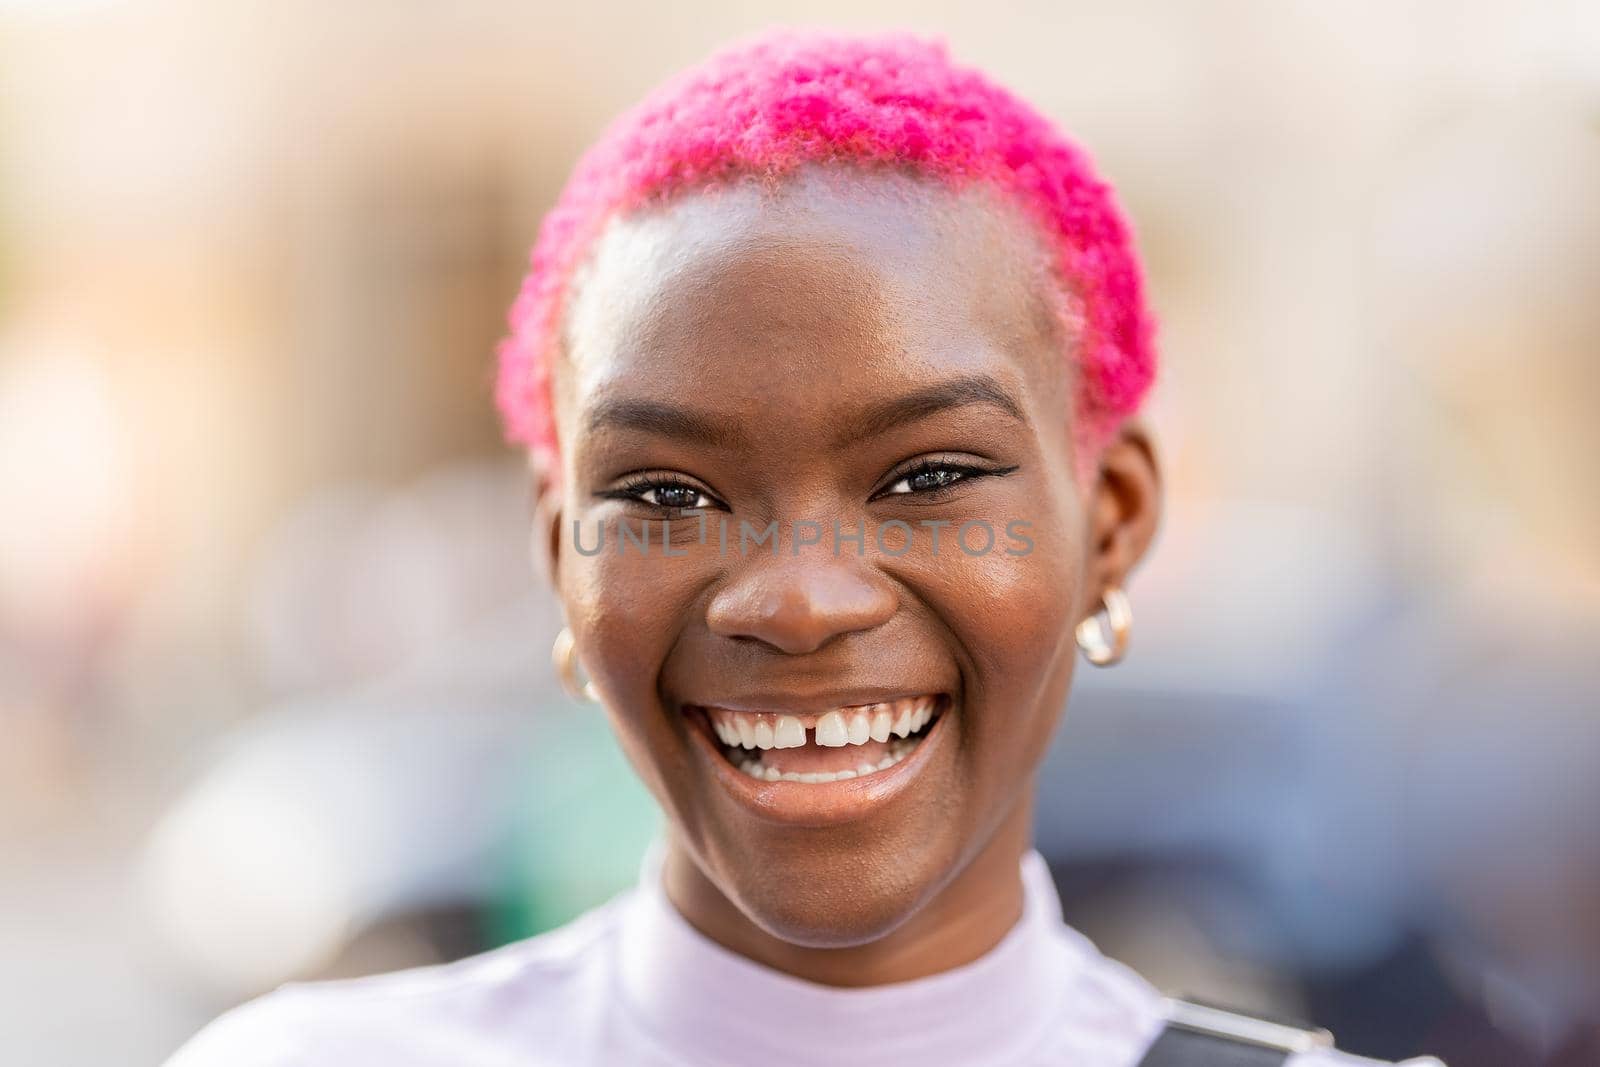 African woman with short pink hair smiling by ivanmoreno